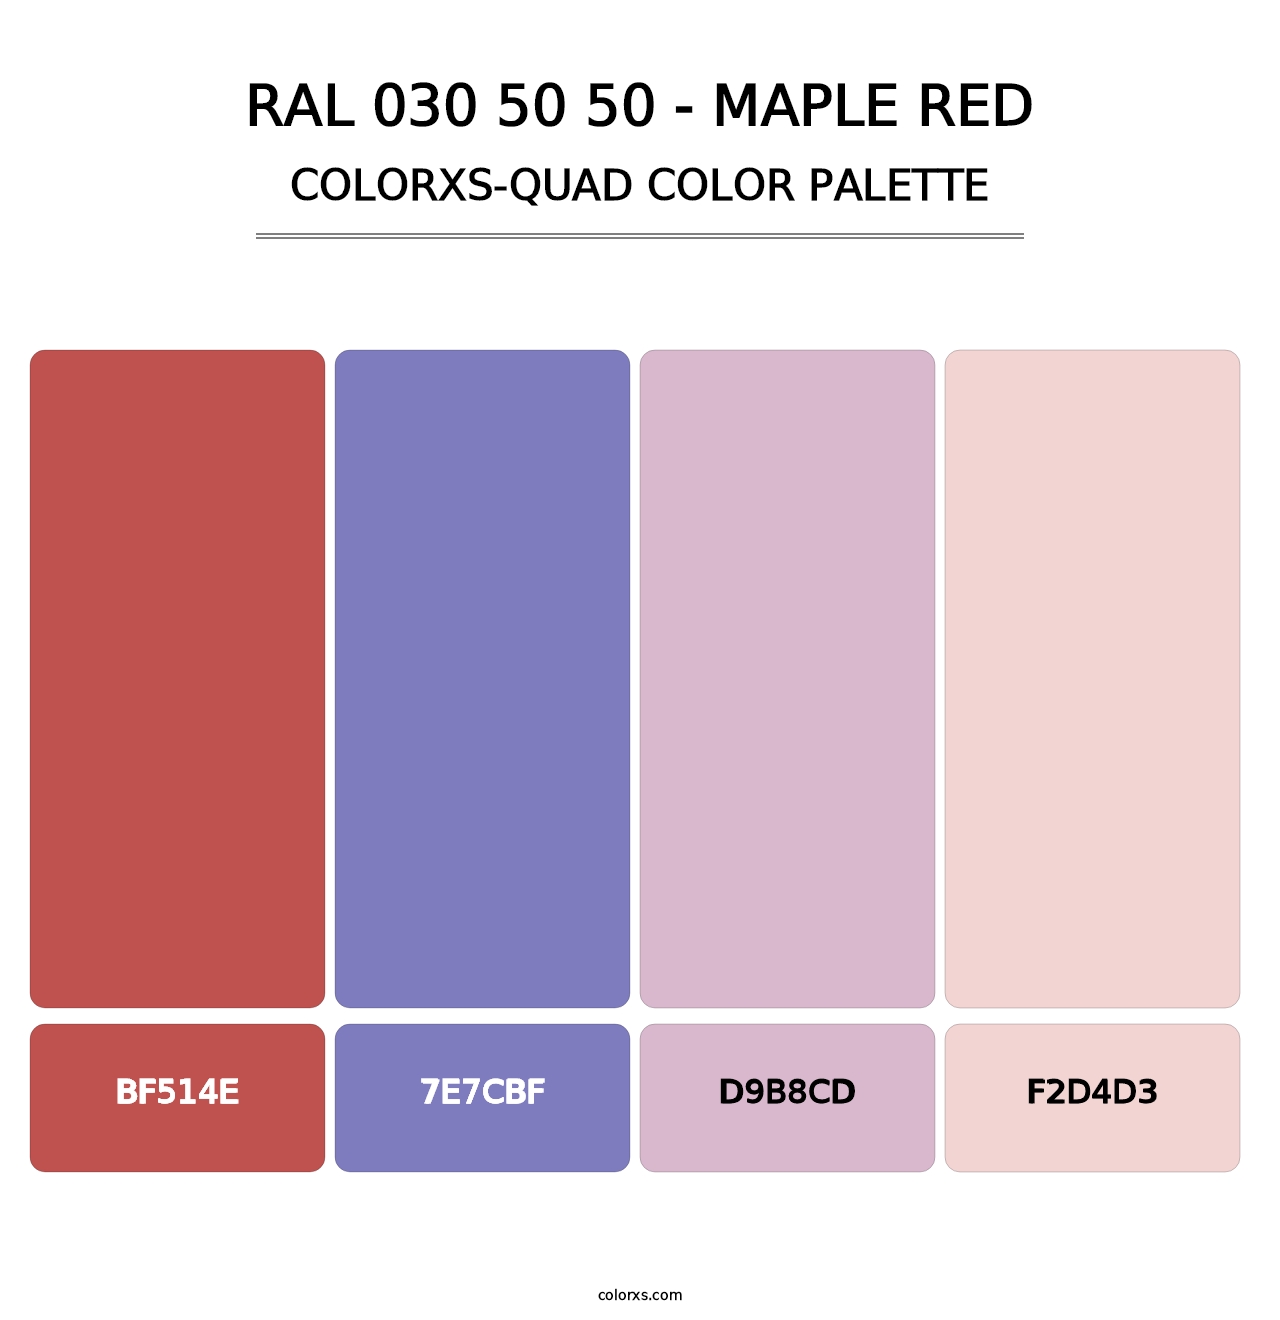 RAL 030 50 50 - Maple Red - Colorxs Quad Palette